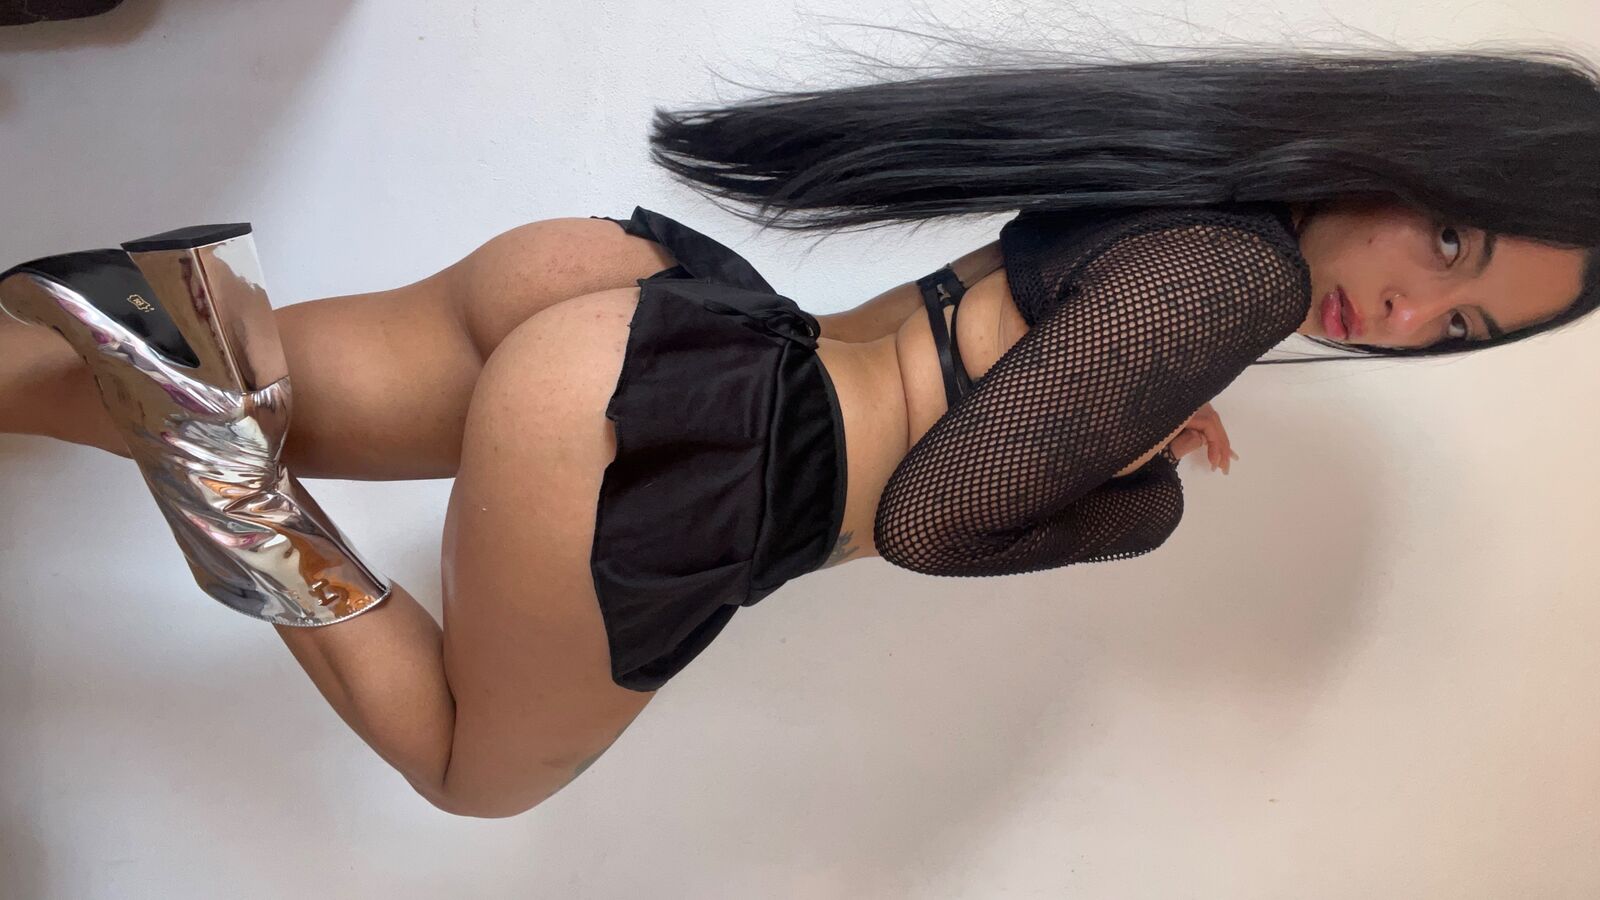 See Charo 🖤VCALL-CUSTOM-SEXTING 🖤 profile